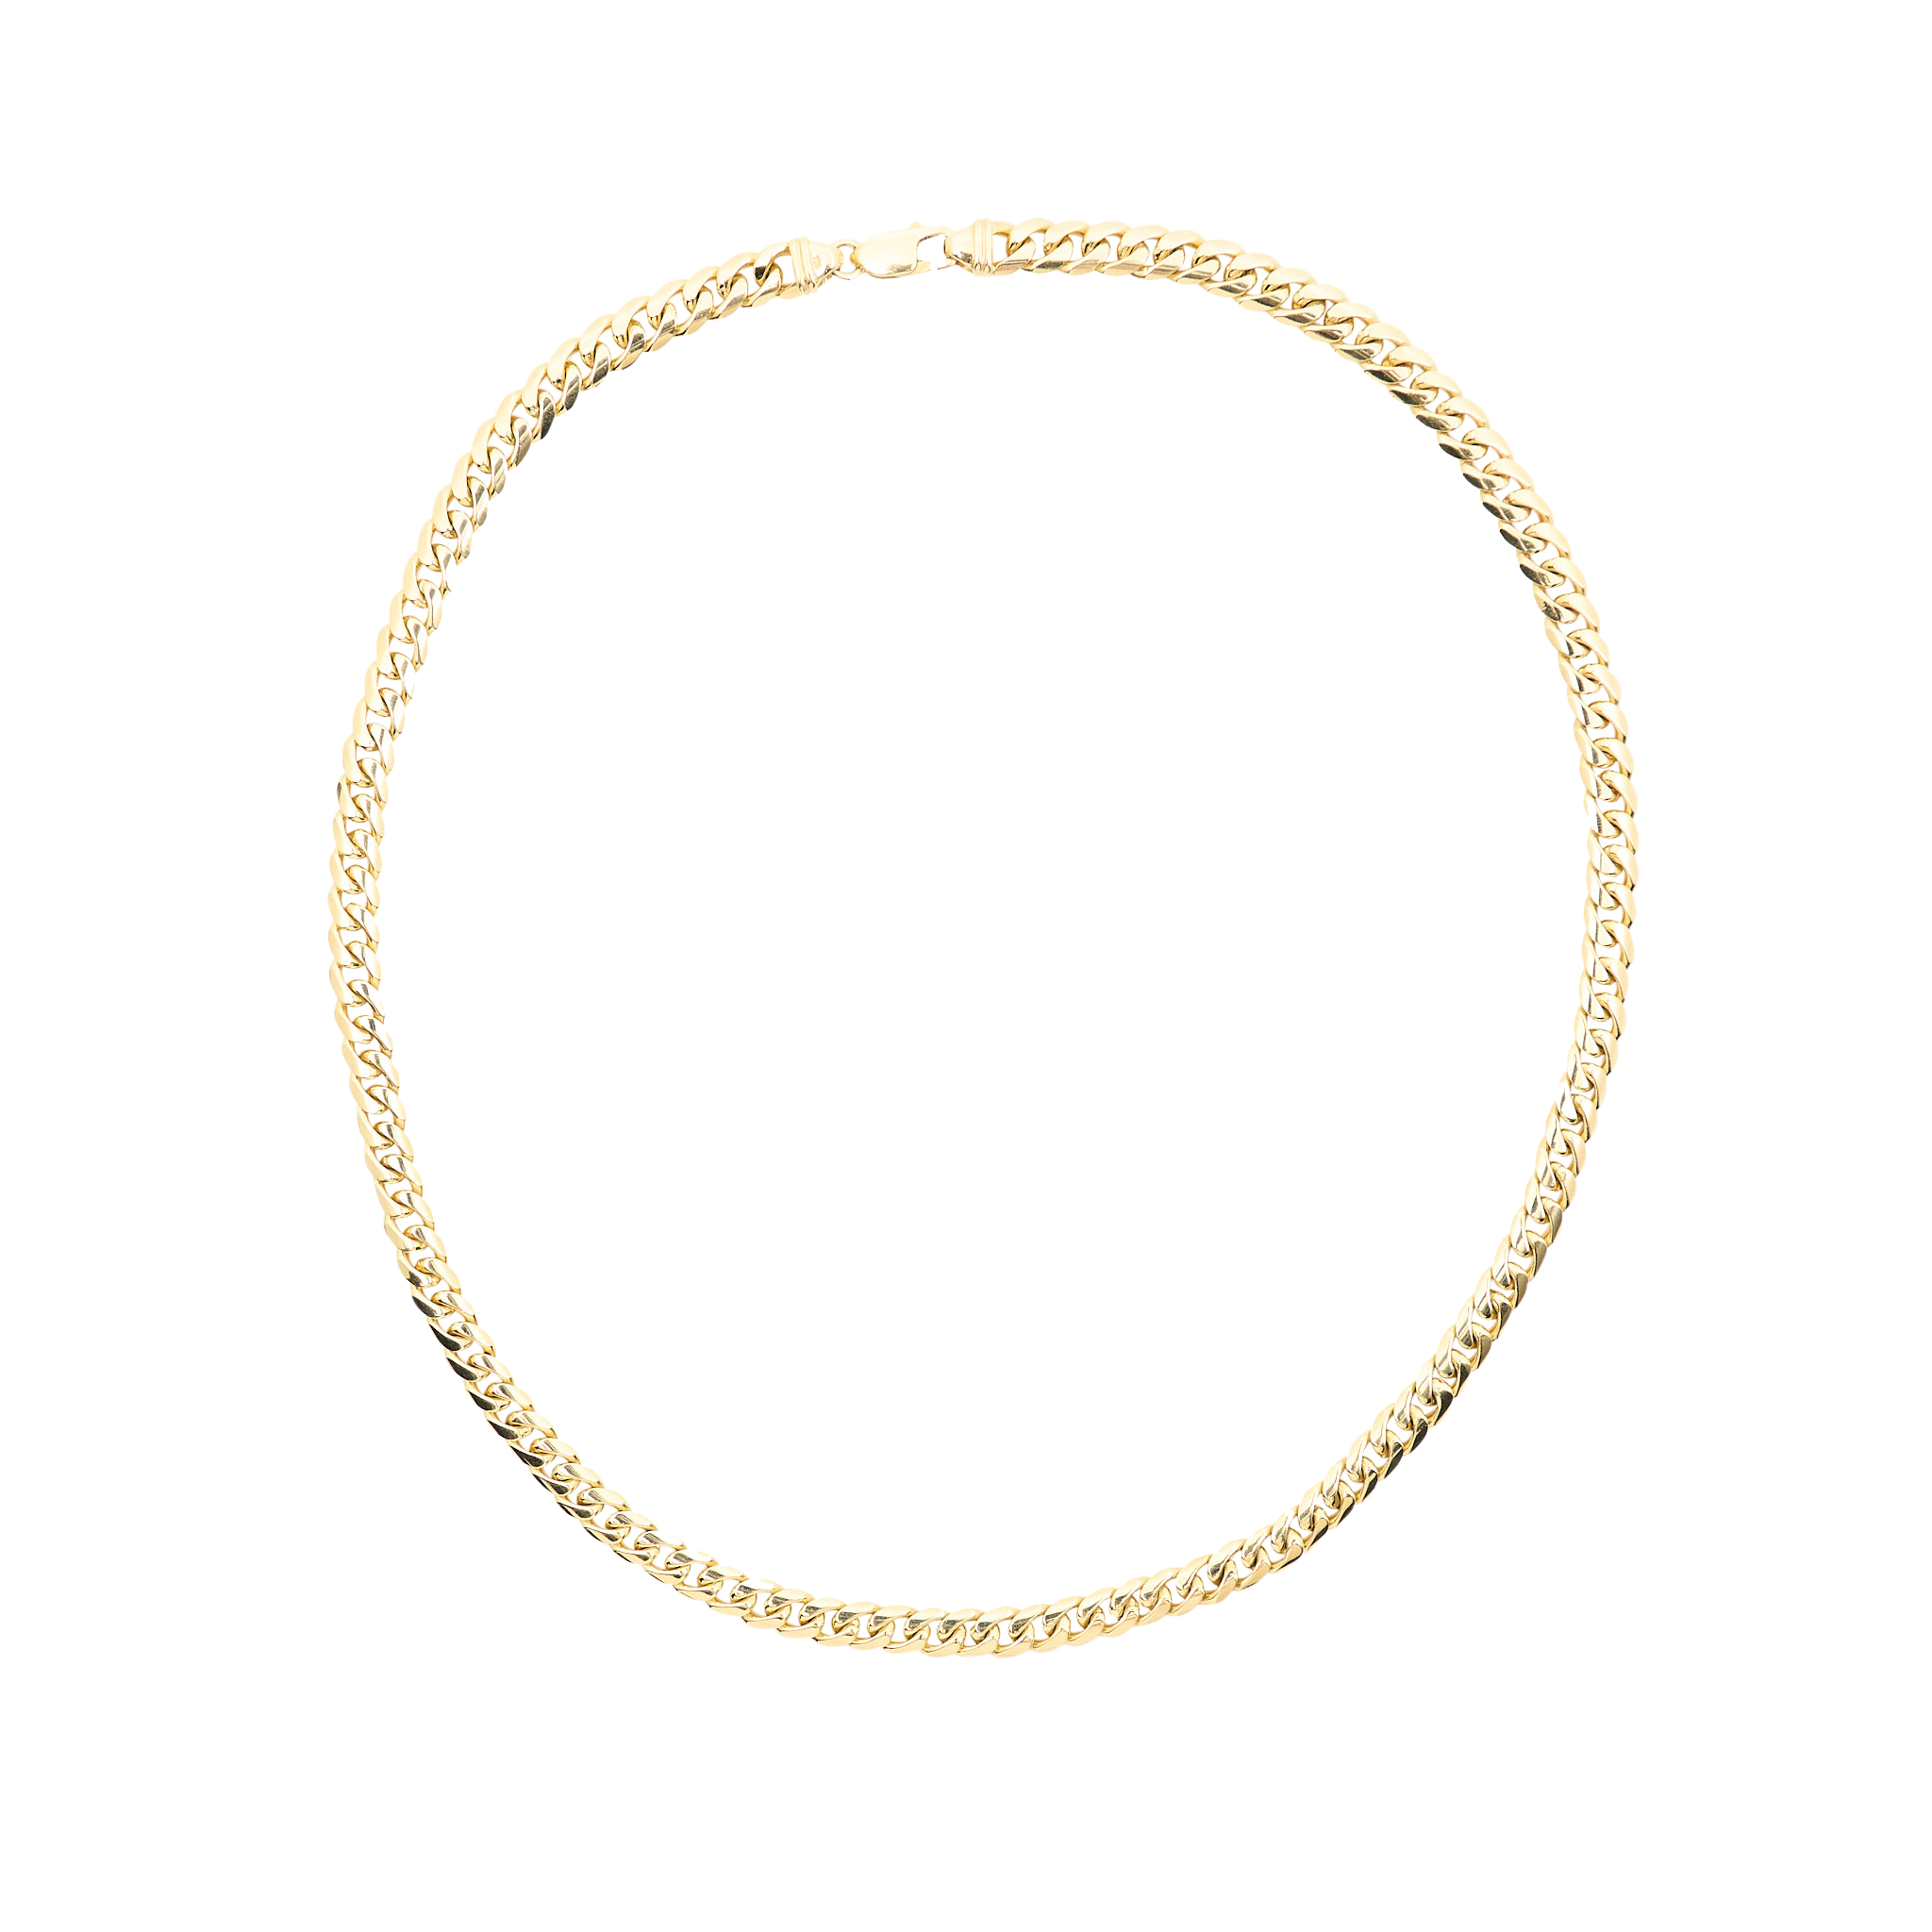 Custom by MV&Co Cuban Link 18ct Gold Chain Necklace